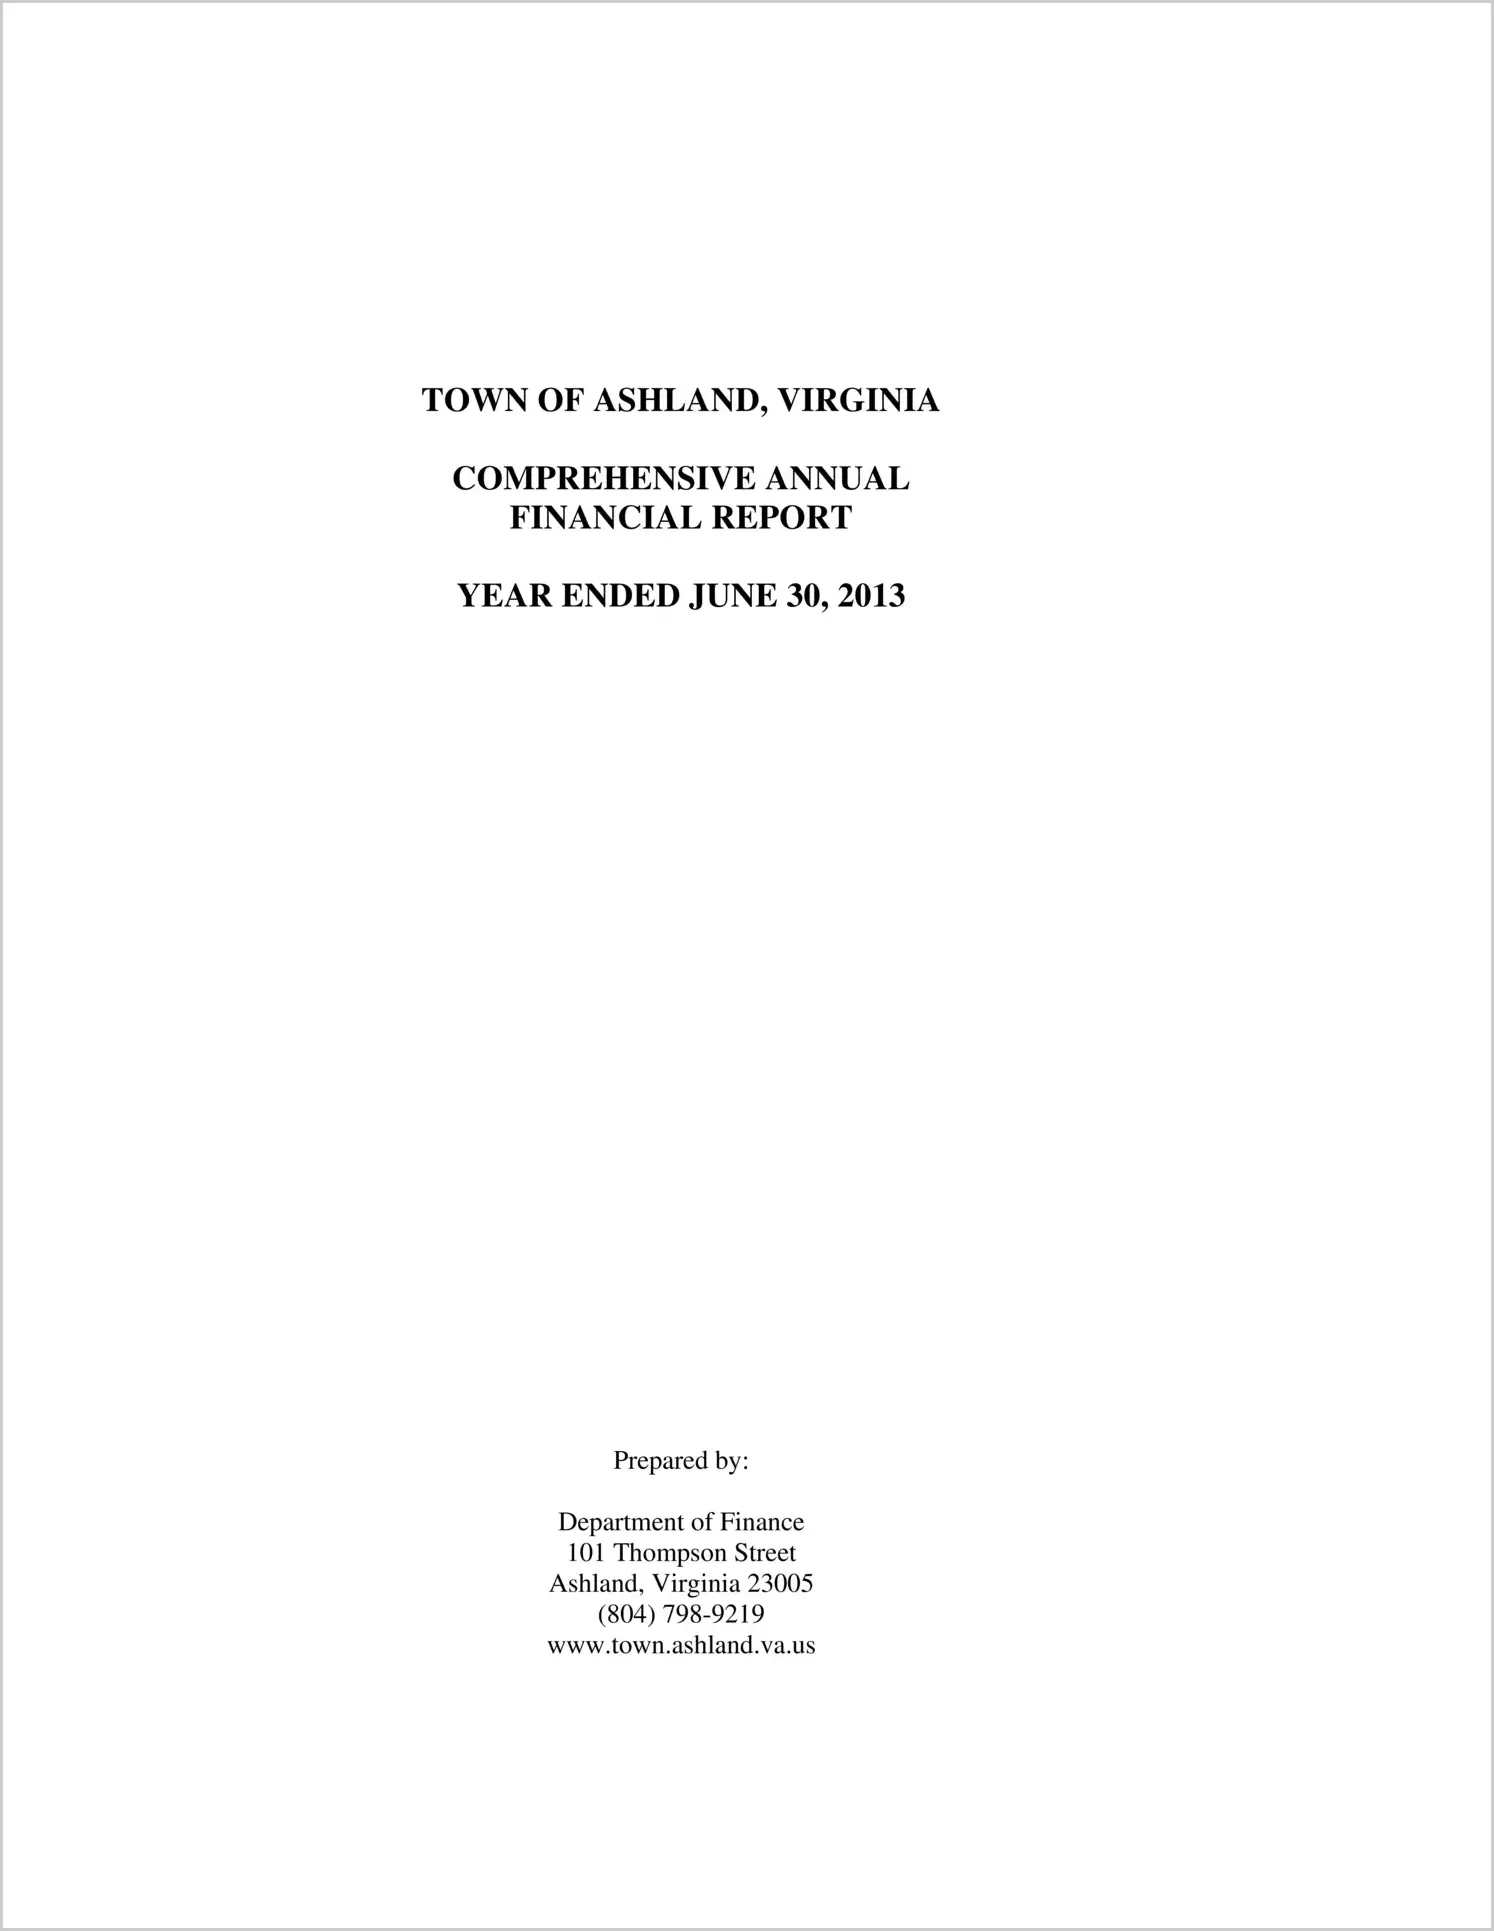 2013 Annual Financial Report for Town of Ashland